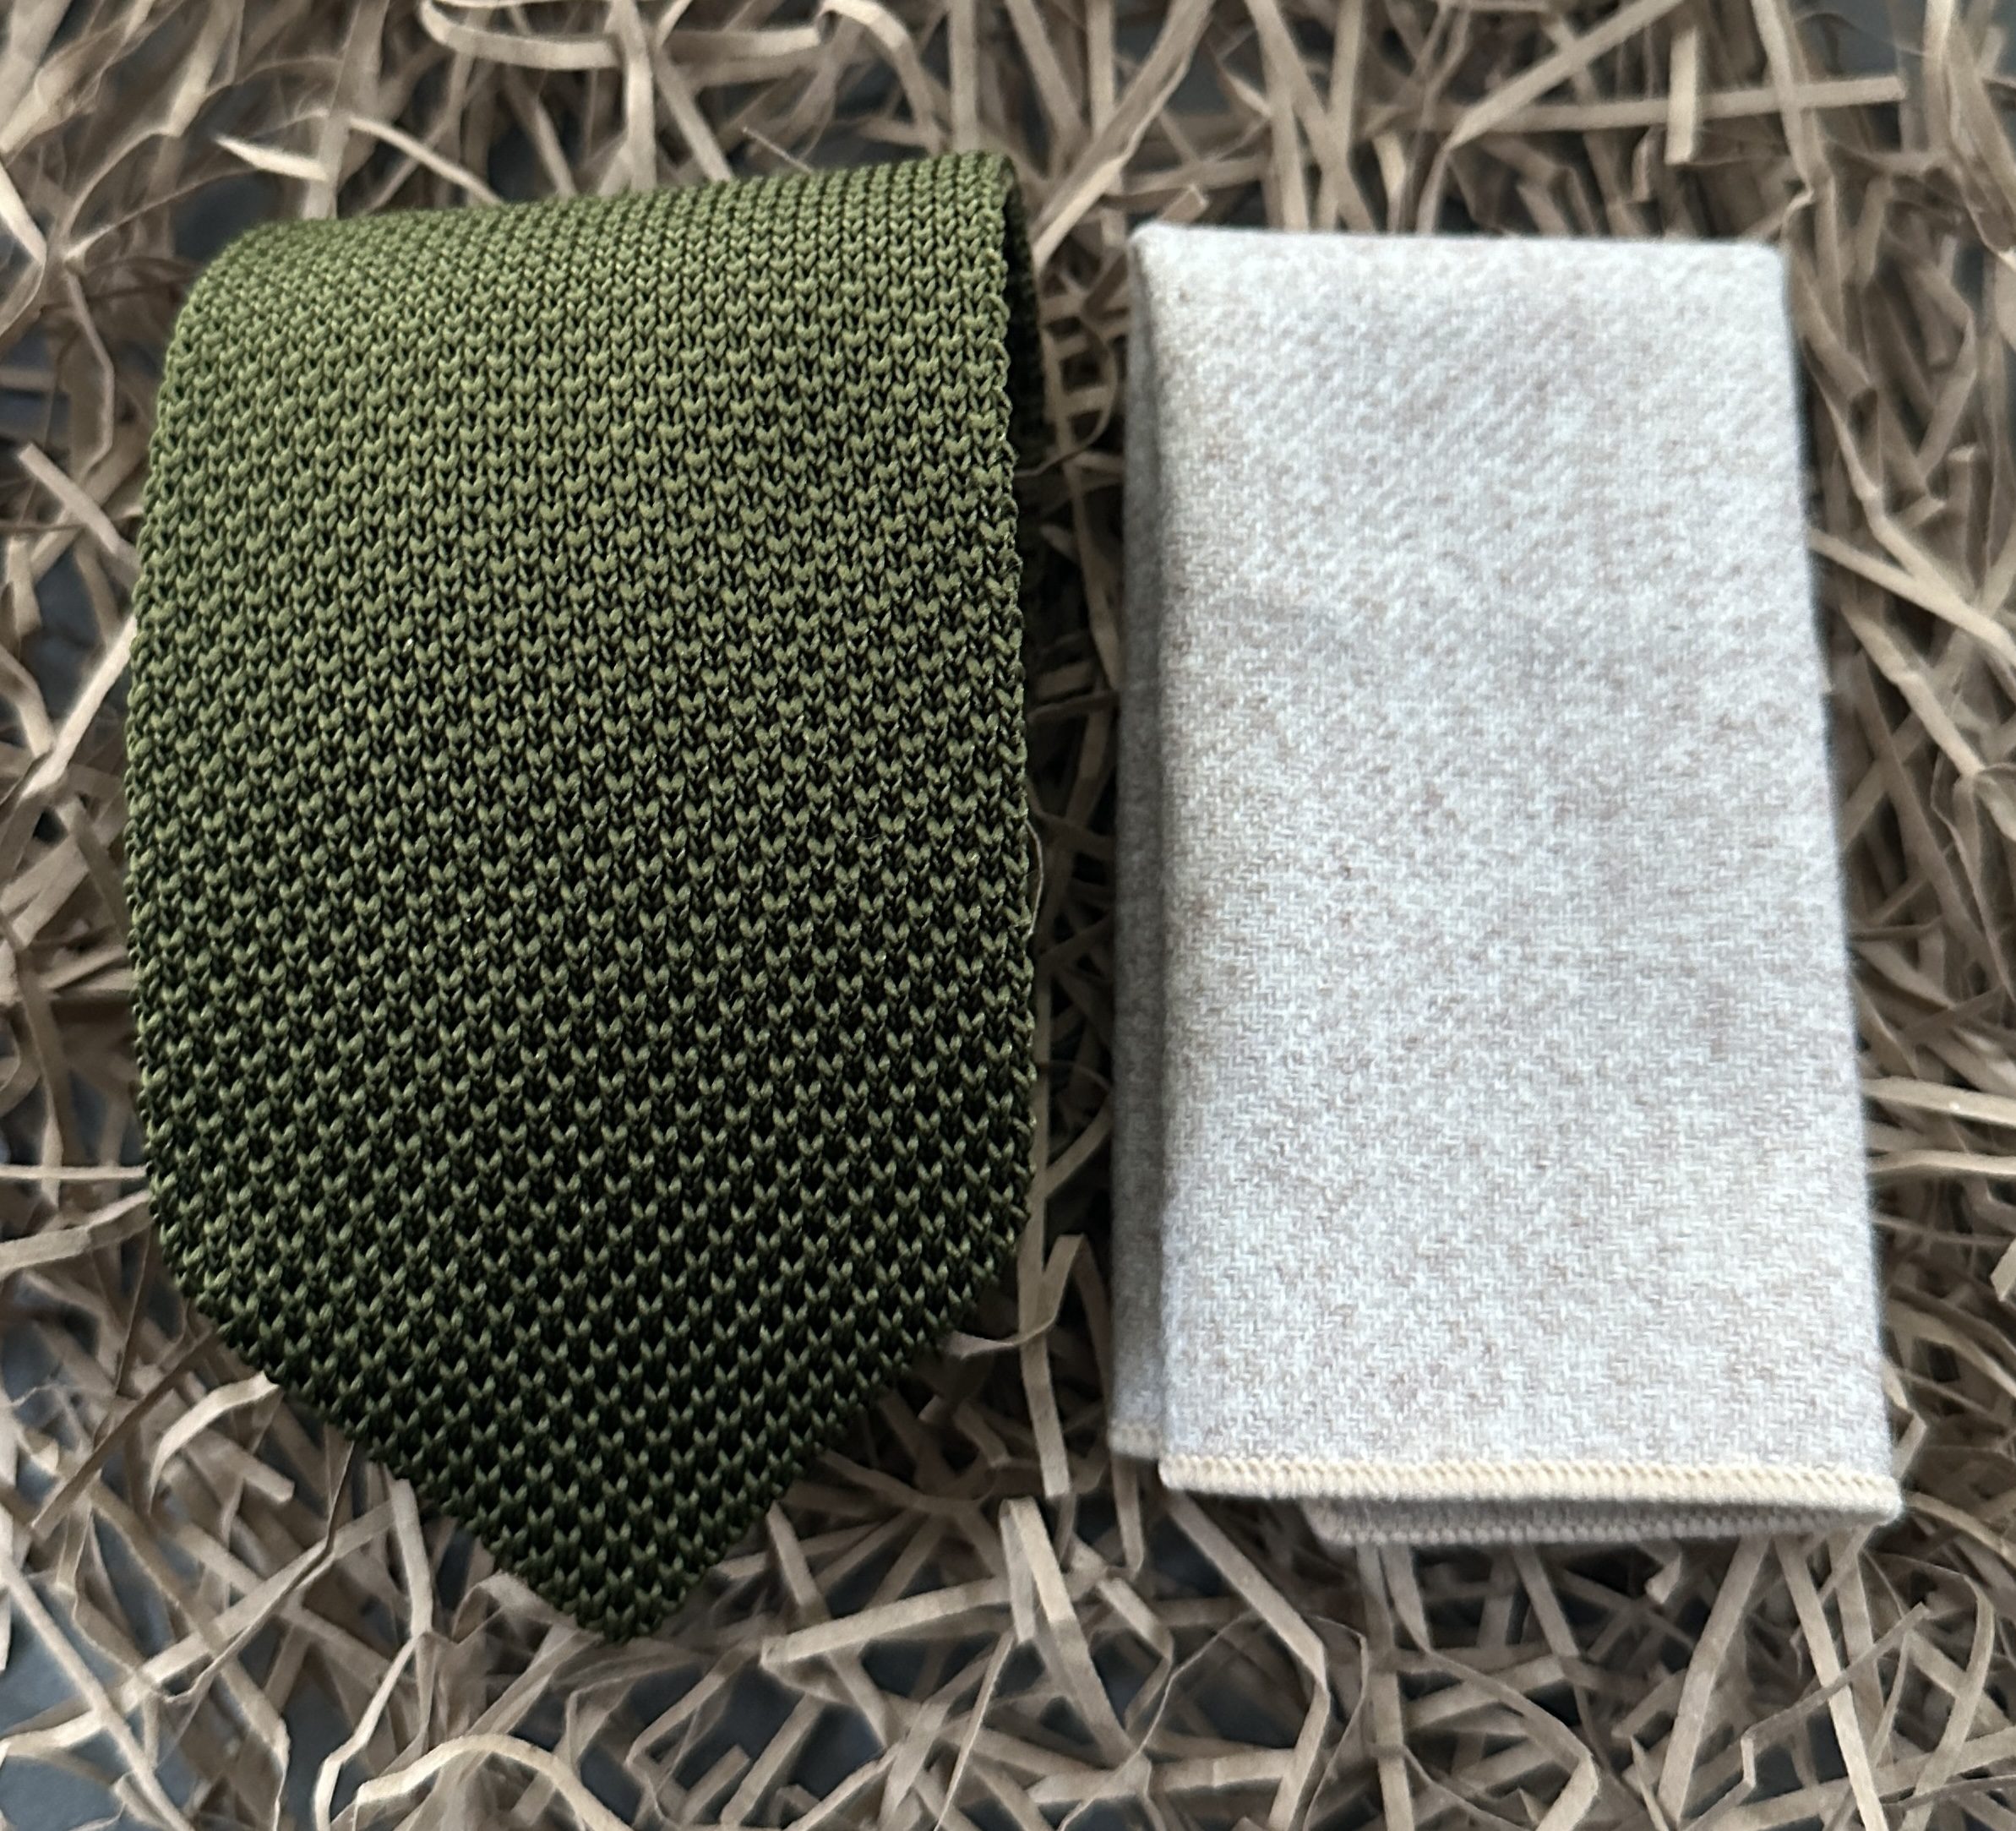 An olive green knitted tie with a cream wool pocket square ideal for men's gifts and wedding attire.